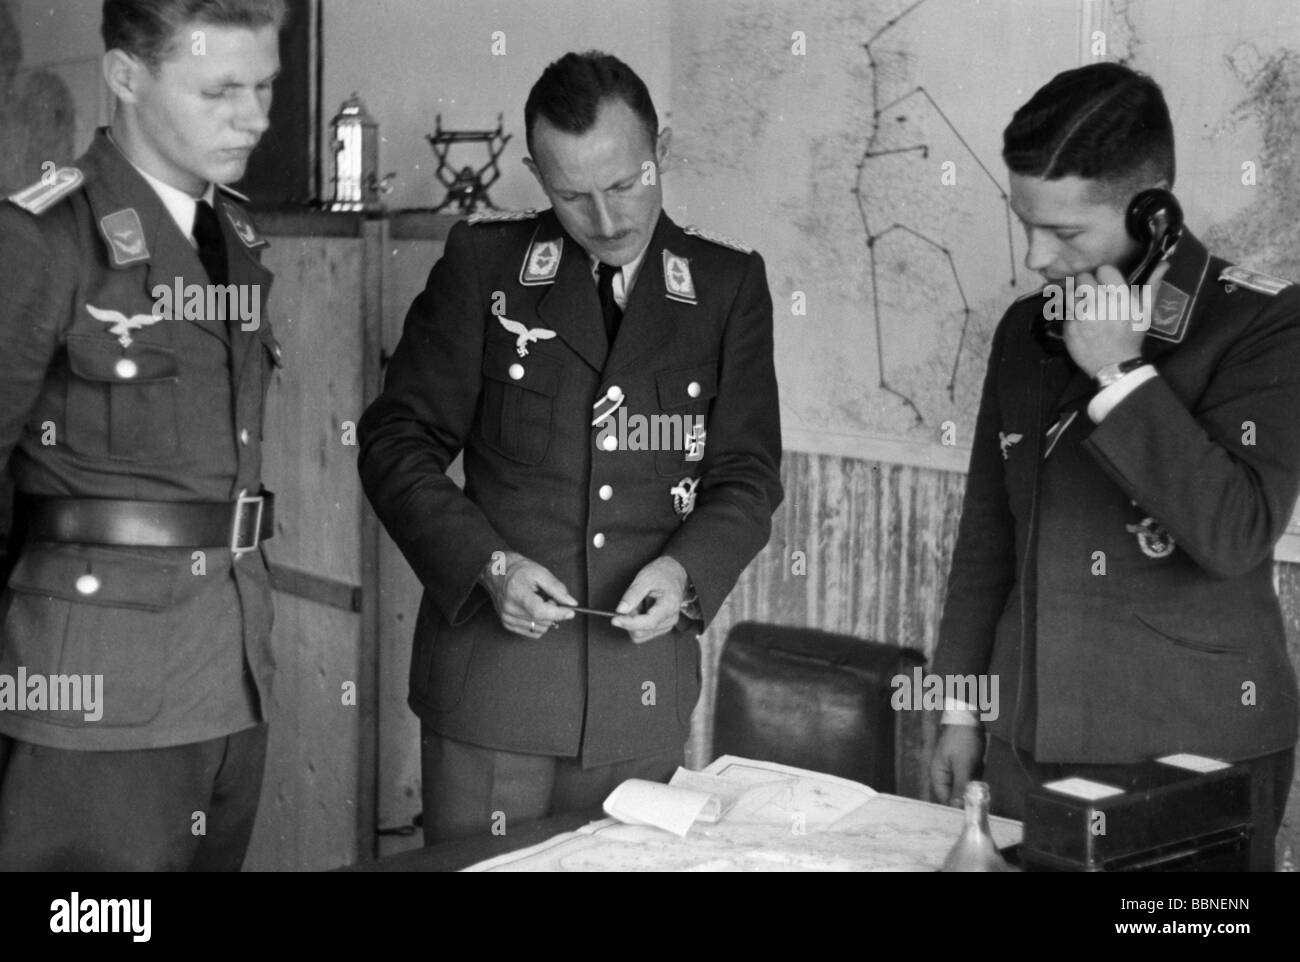 events, Second World War / WWII, aerial warfare, persons, staff officers of a Luftwaffe bomber wing during a briefing, summer / autumn 1940, Stock Photo